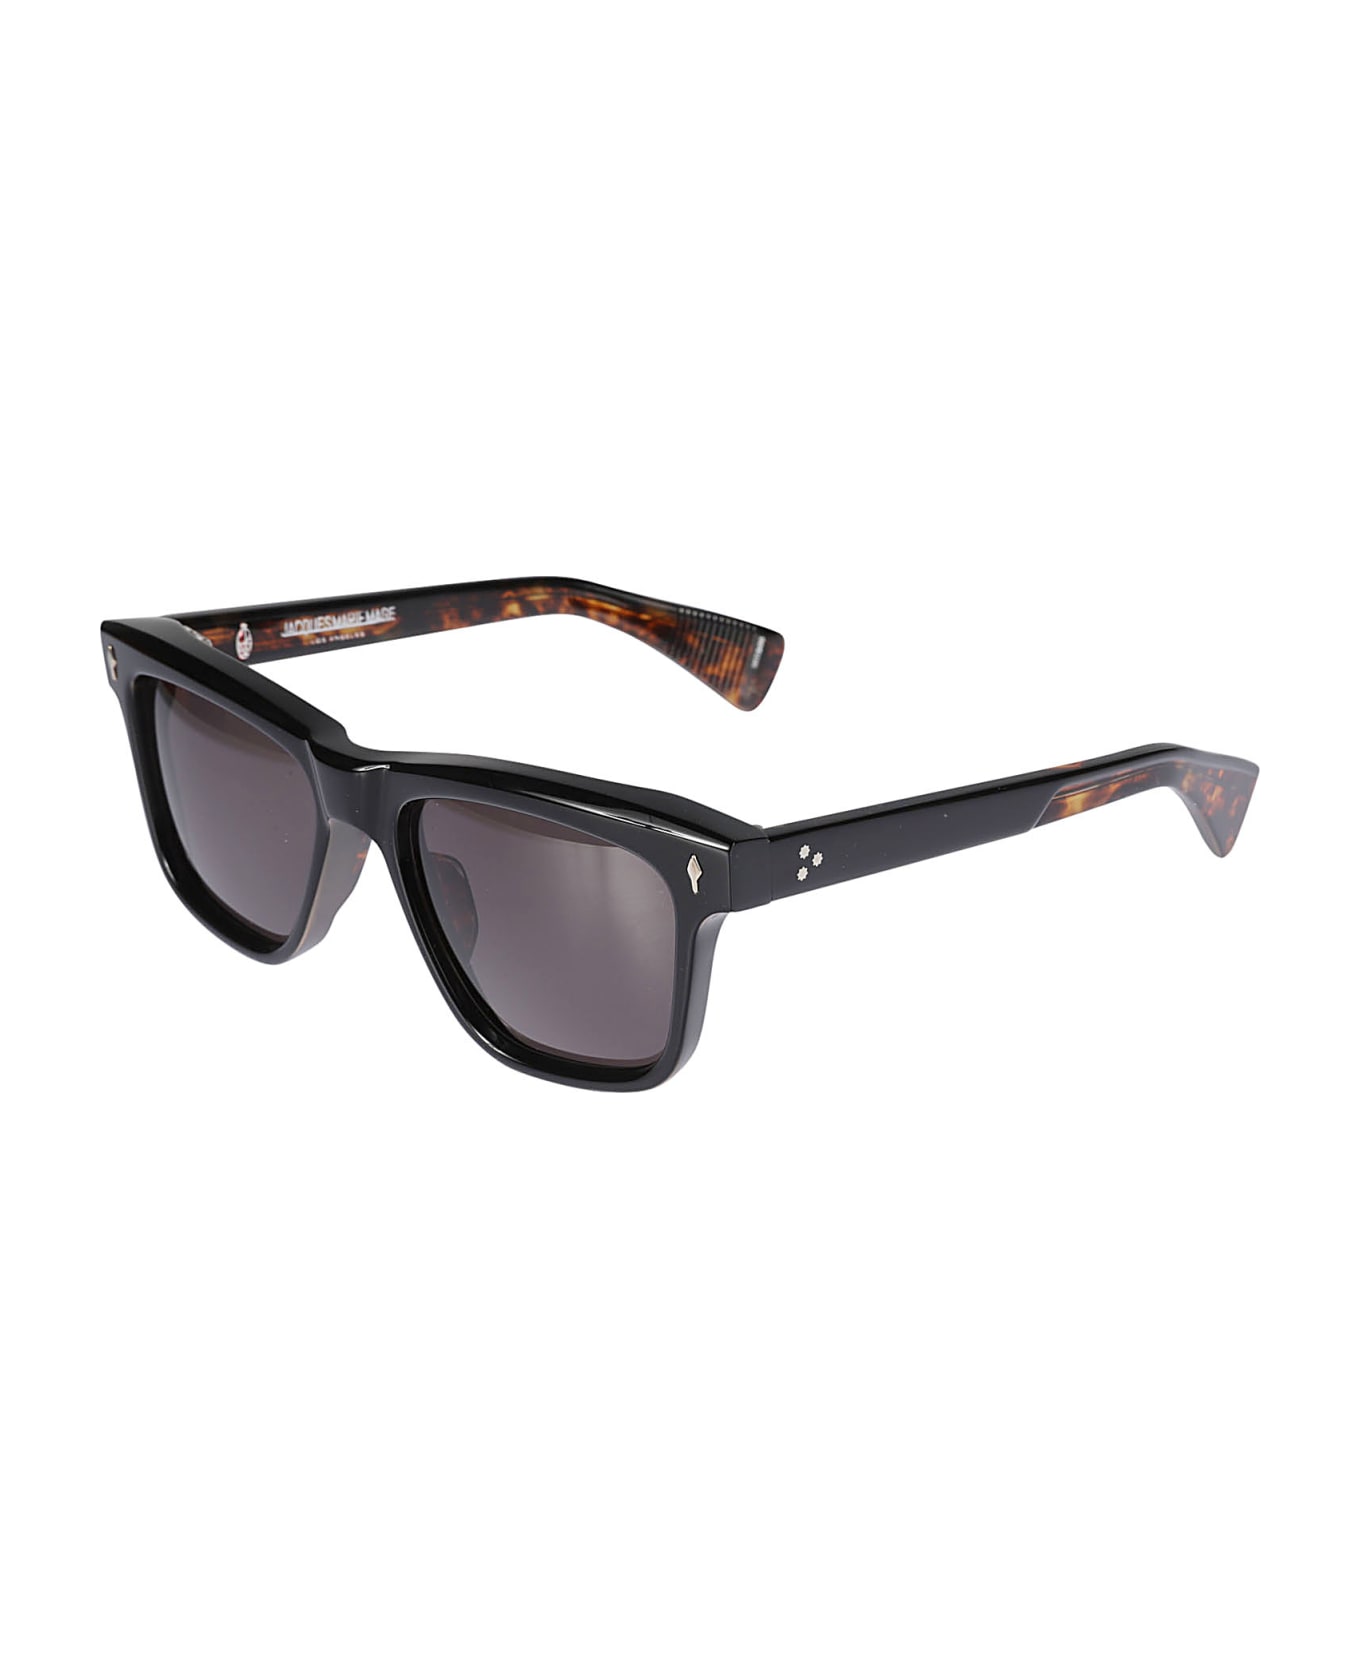 Jacques Marie Mage Lankaster Sunglasses edgy - Black